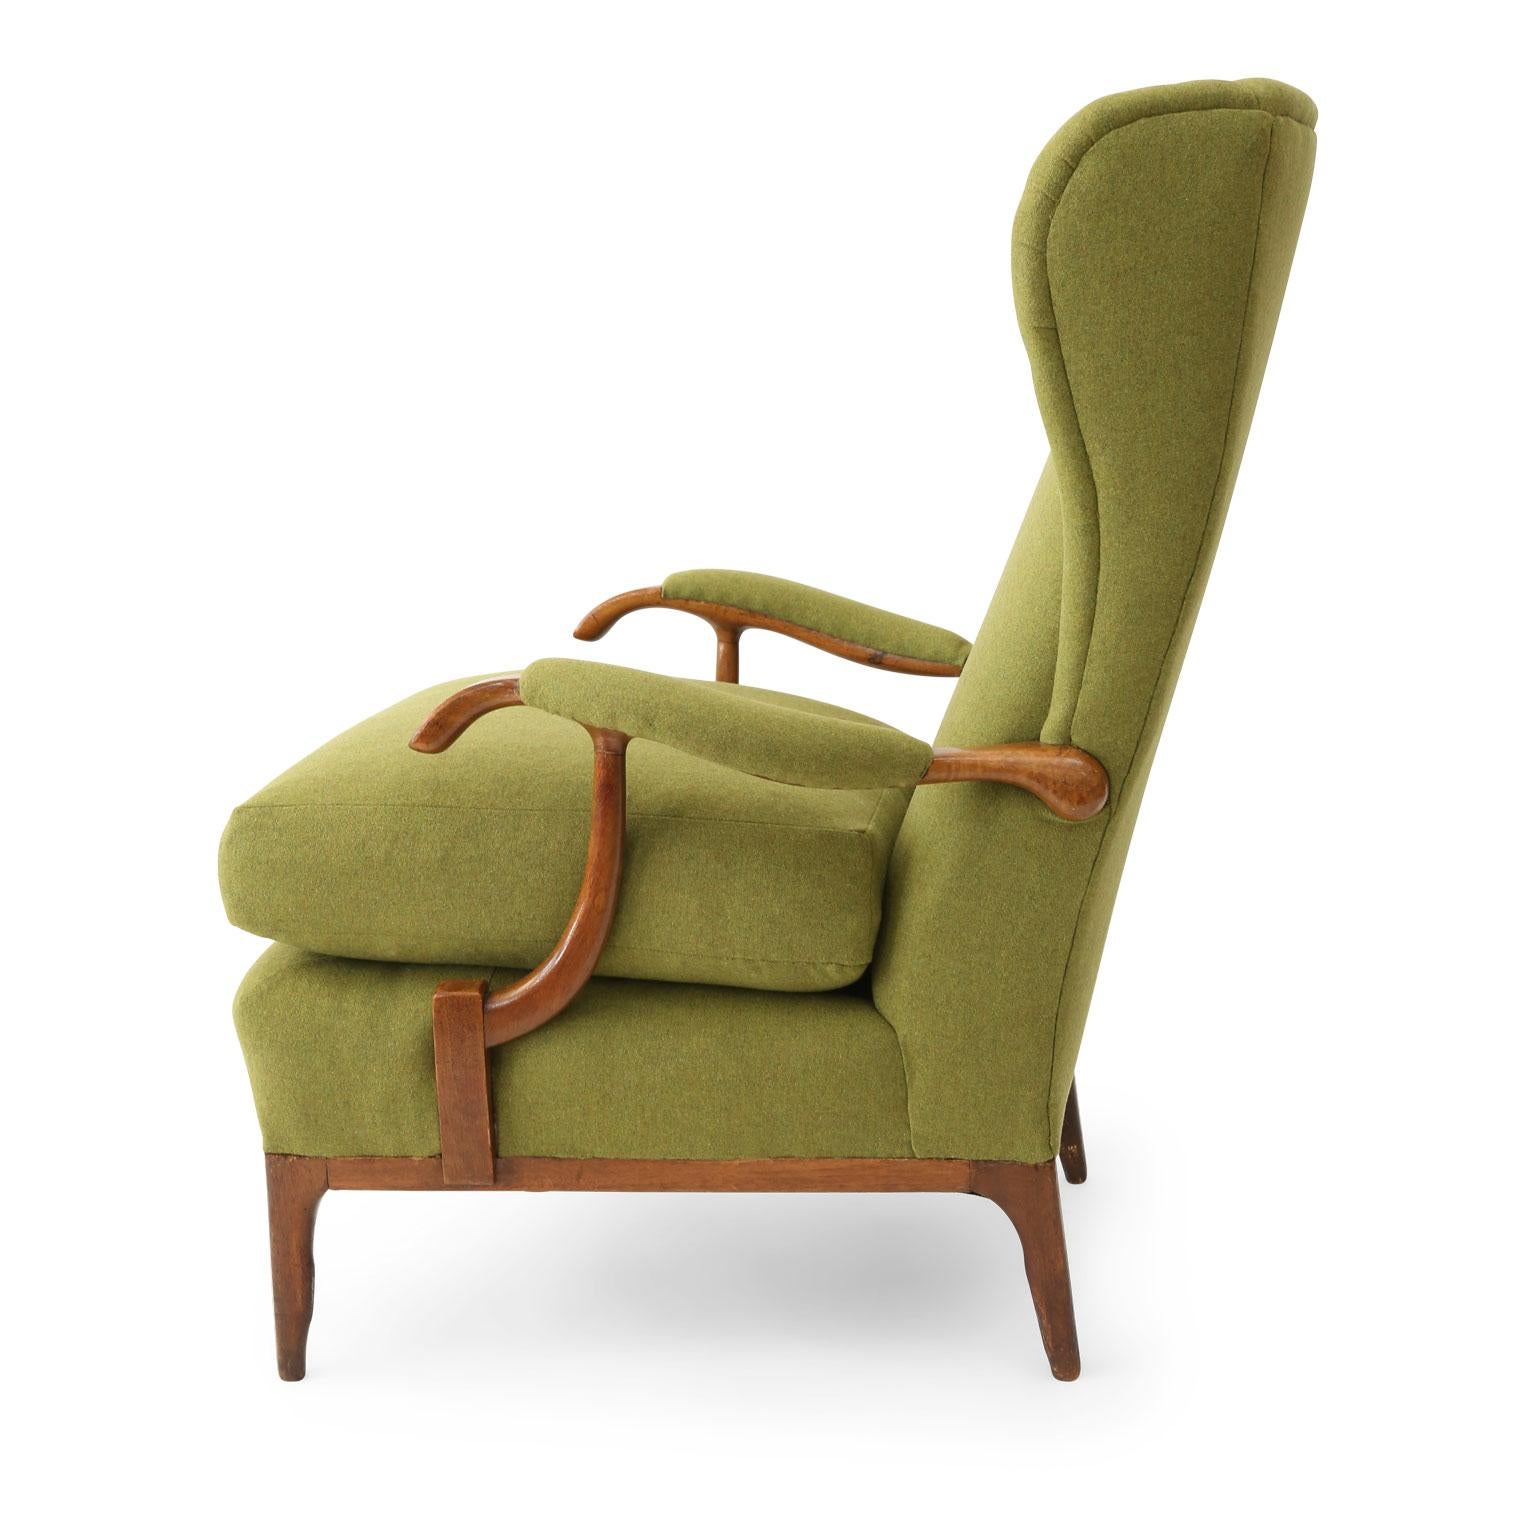 Midcentury Paolo Buffa lounge chair by Framar, circa 1950s. Sturdy walnut Italian wingback frame newly-reupholstered in a fine green wool with a down-wrap seat cushion.
 